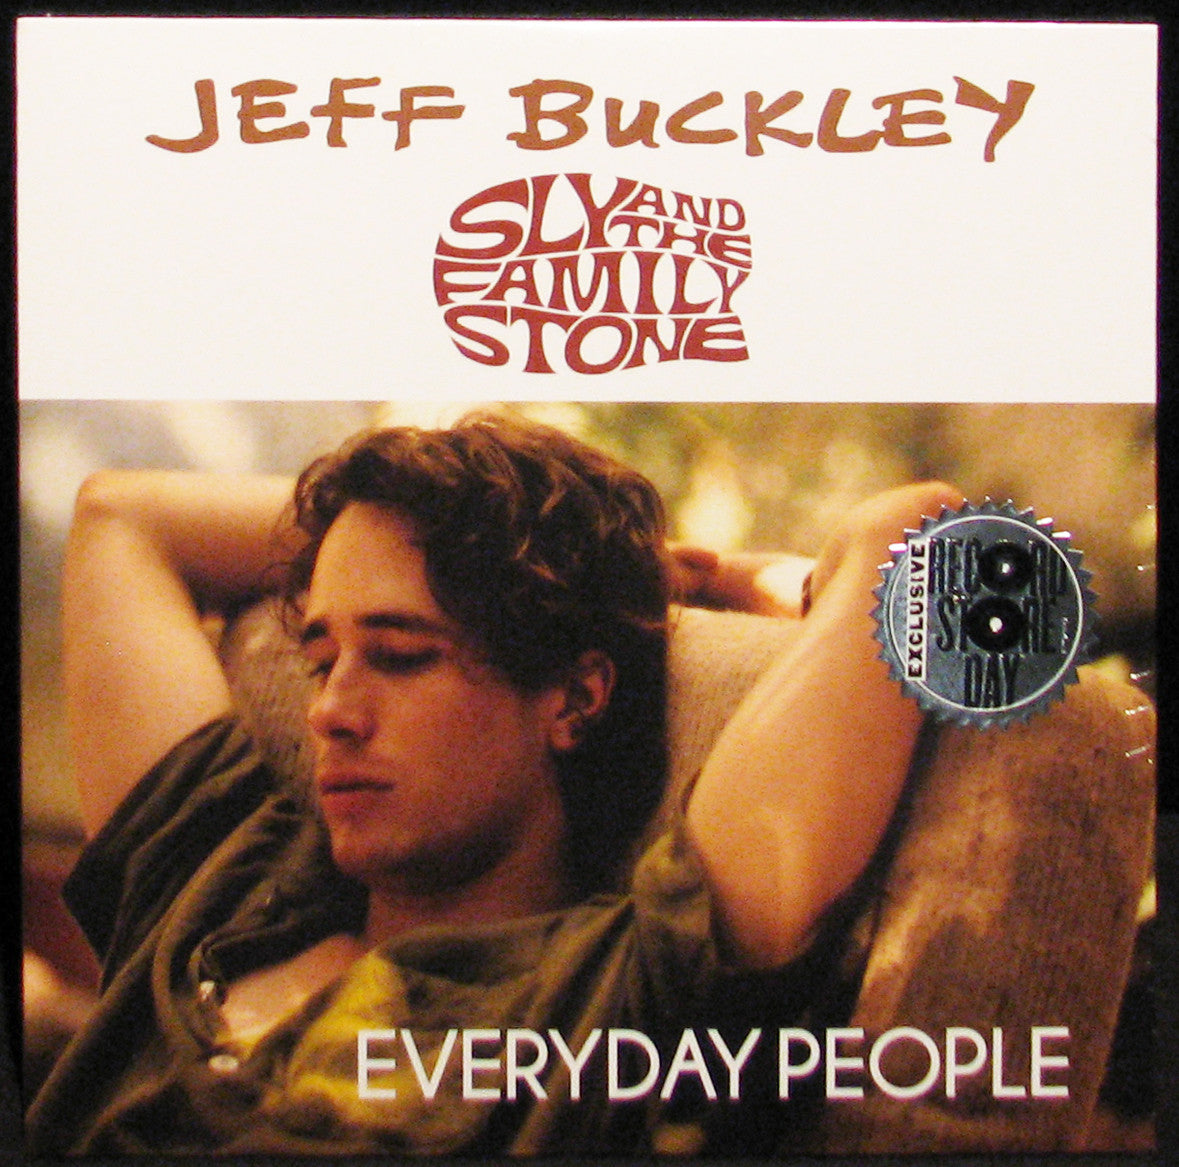 Jeff Buckley / Sly & The Family Stone ‎– Everyday People - New 7" Single 2015 Record Store Day Black Friday Vinyl - Soul